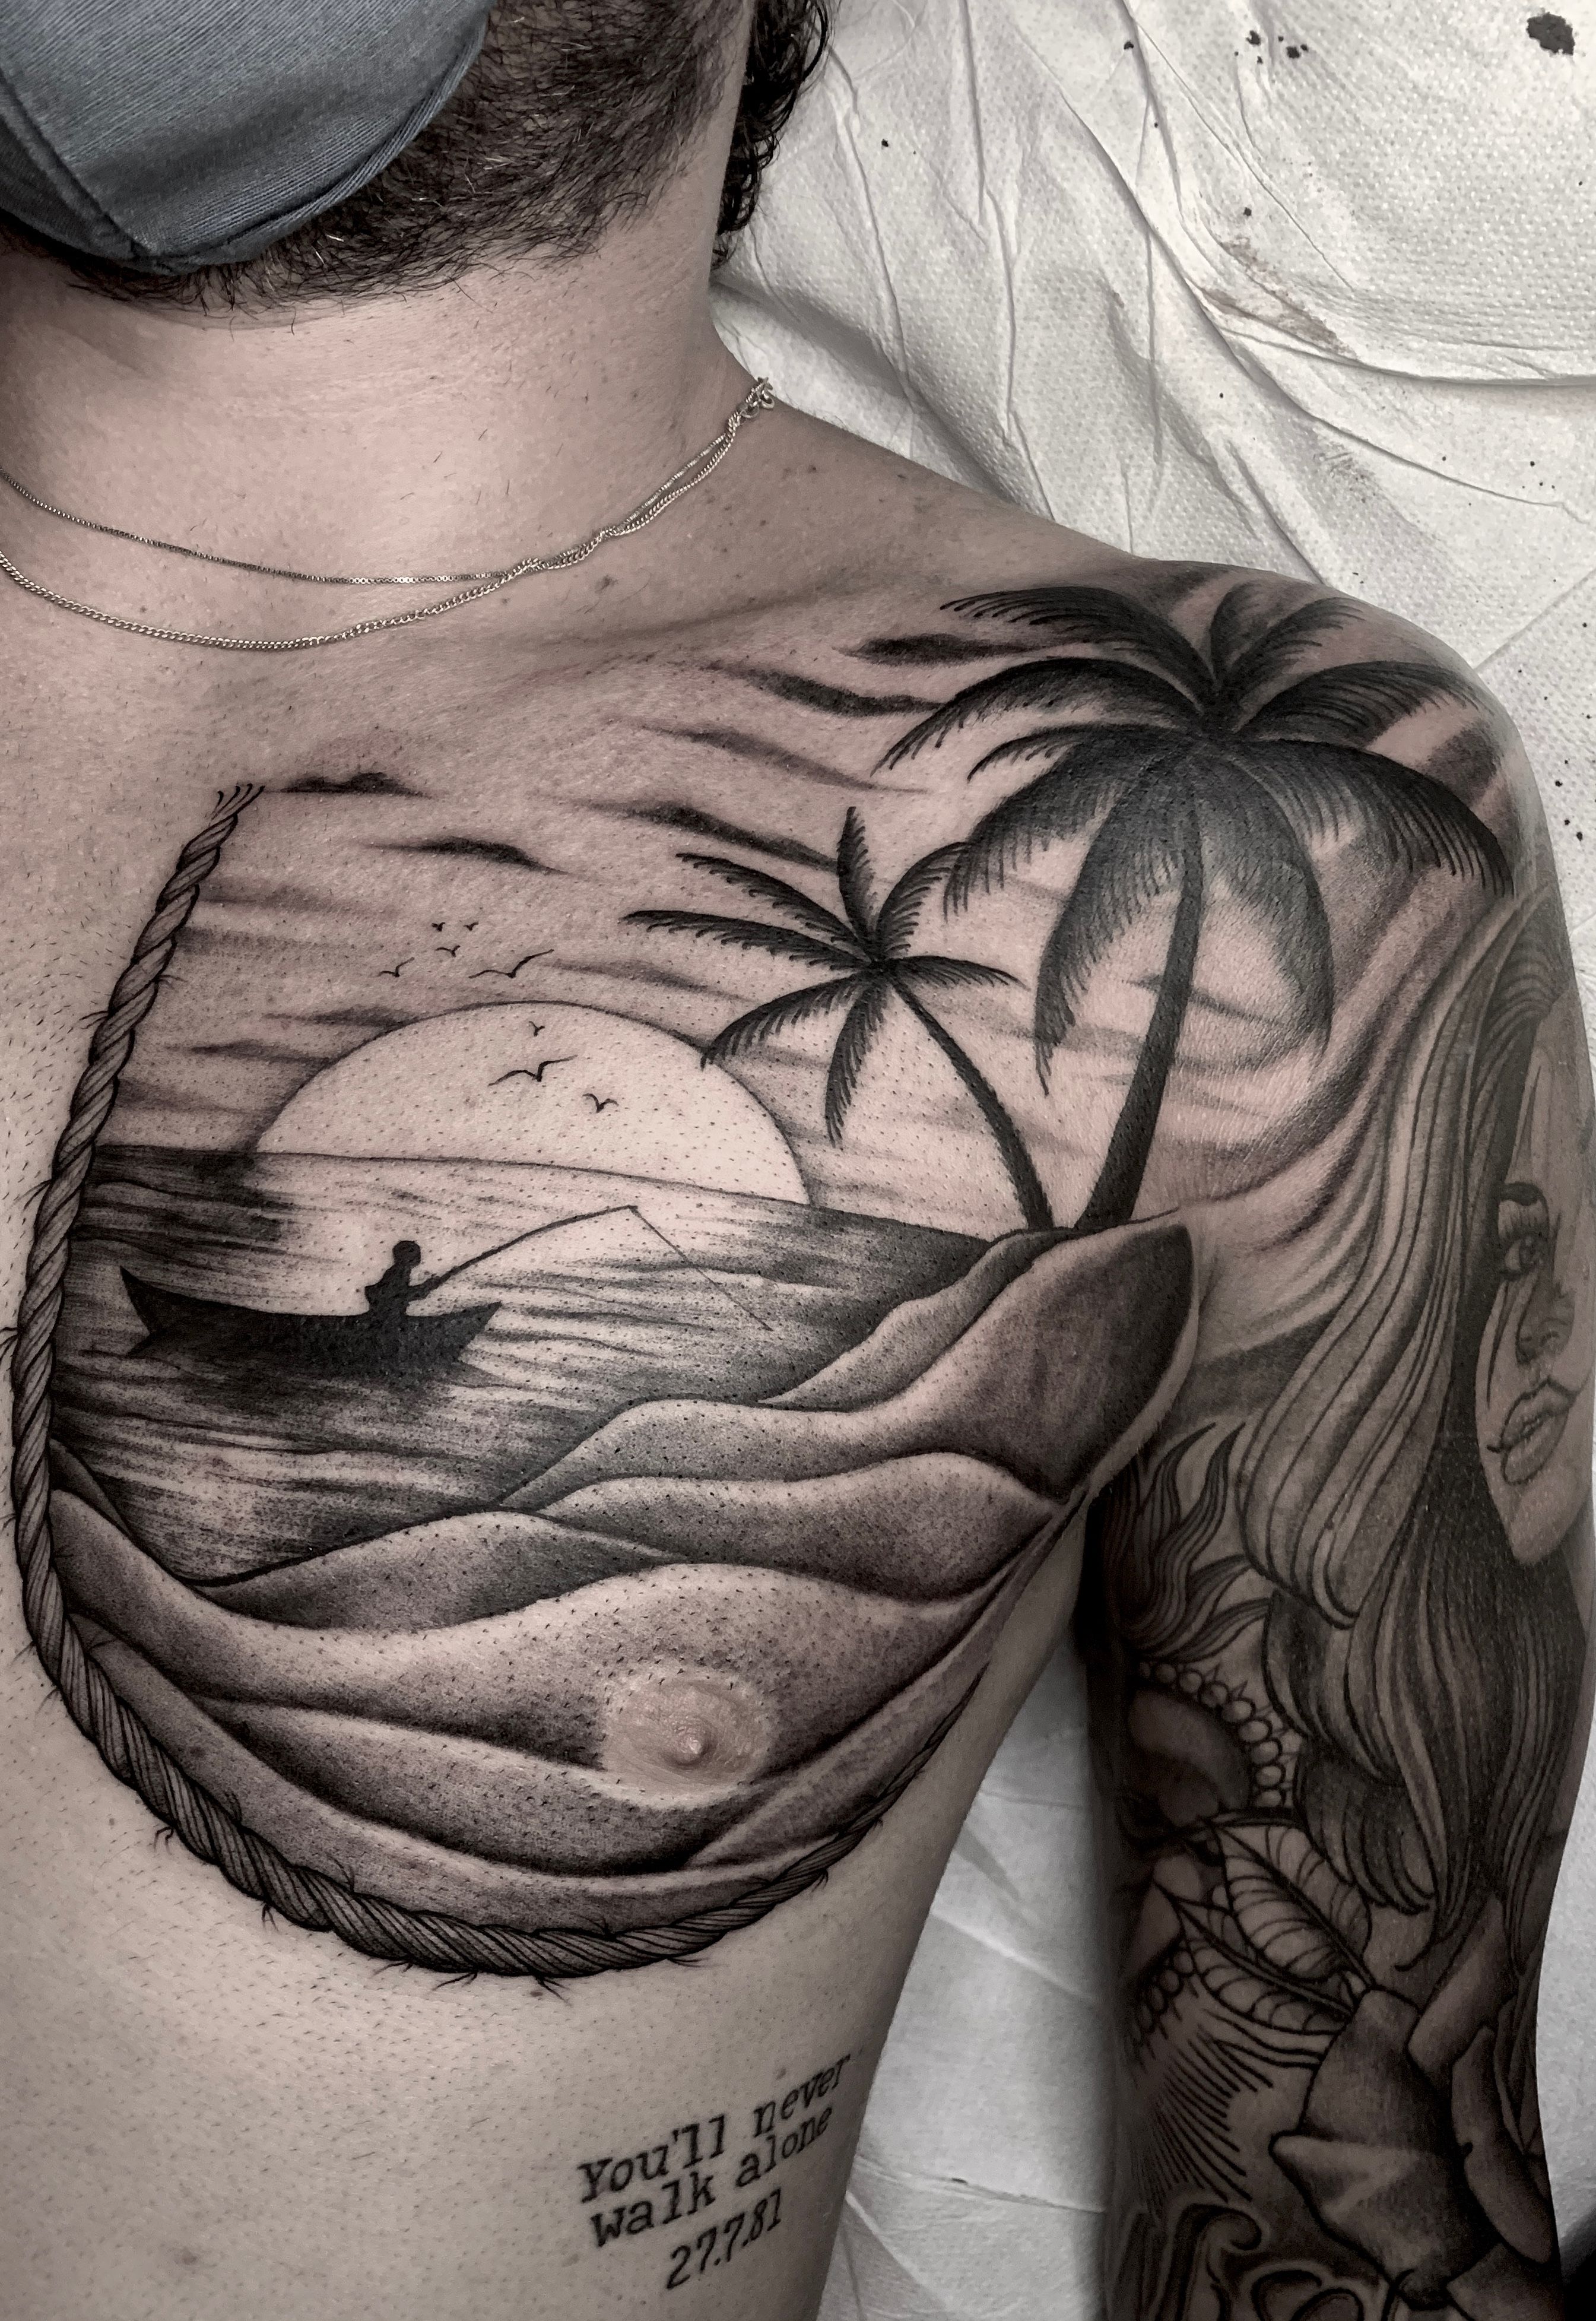 Tattoo Removal in North Myrtle Beach | Touch MedSpa